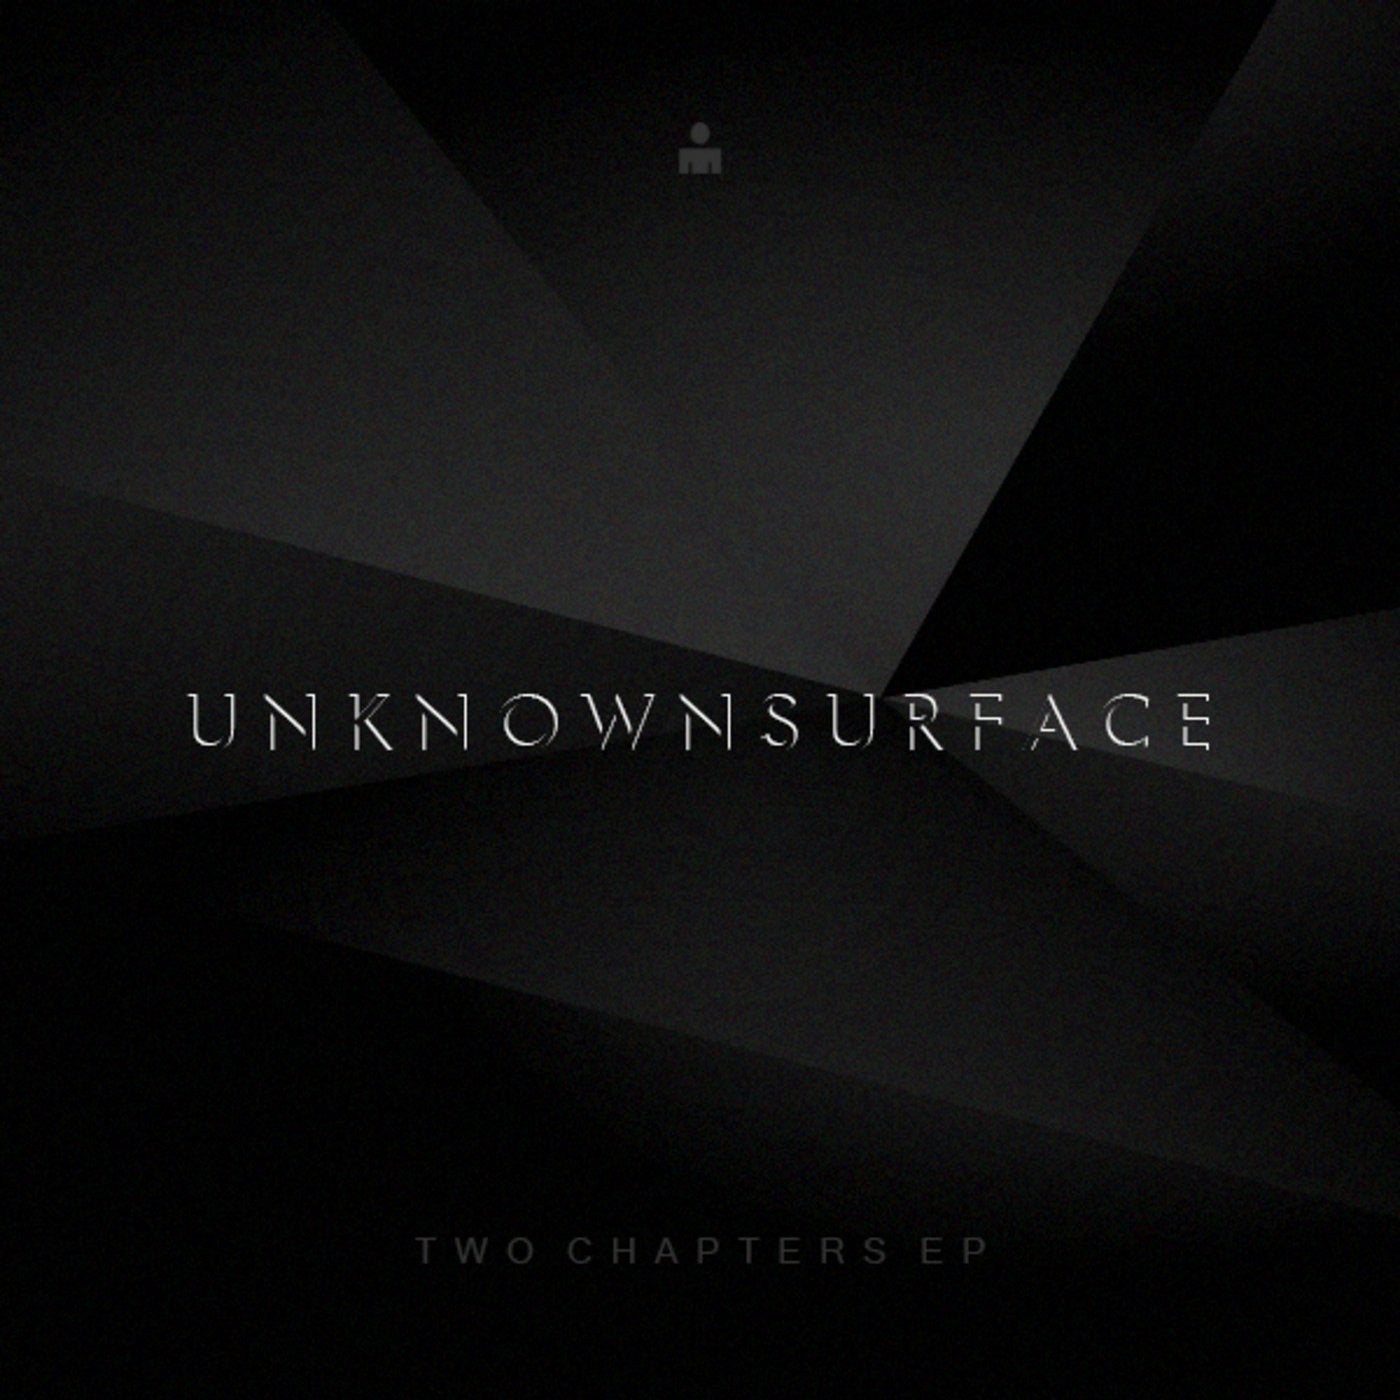 Two Chapters EP